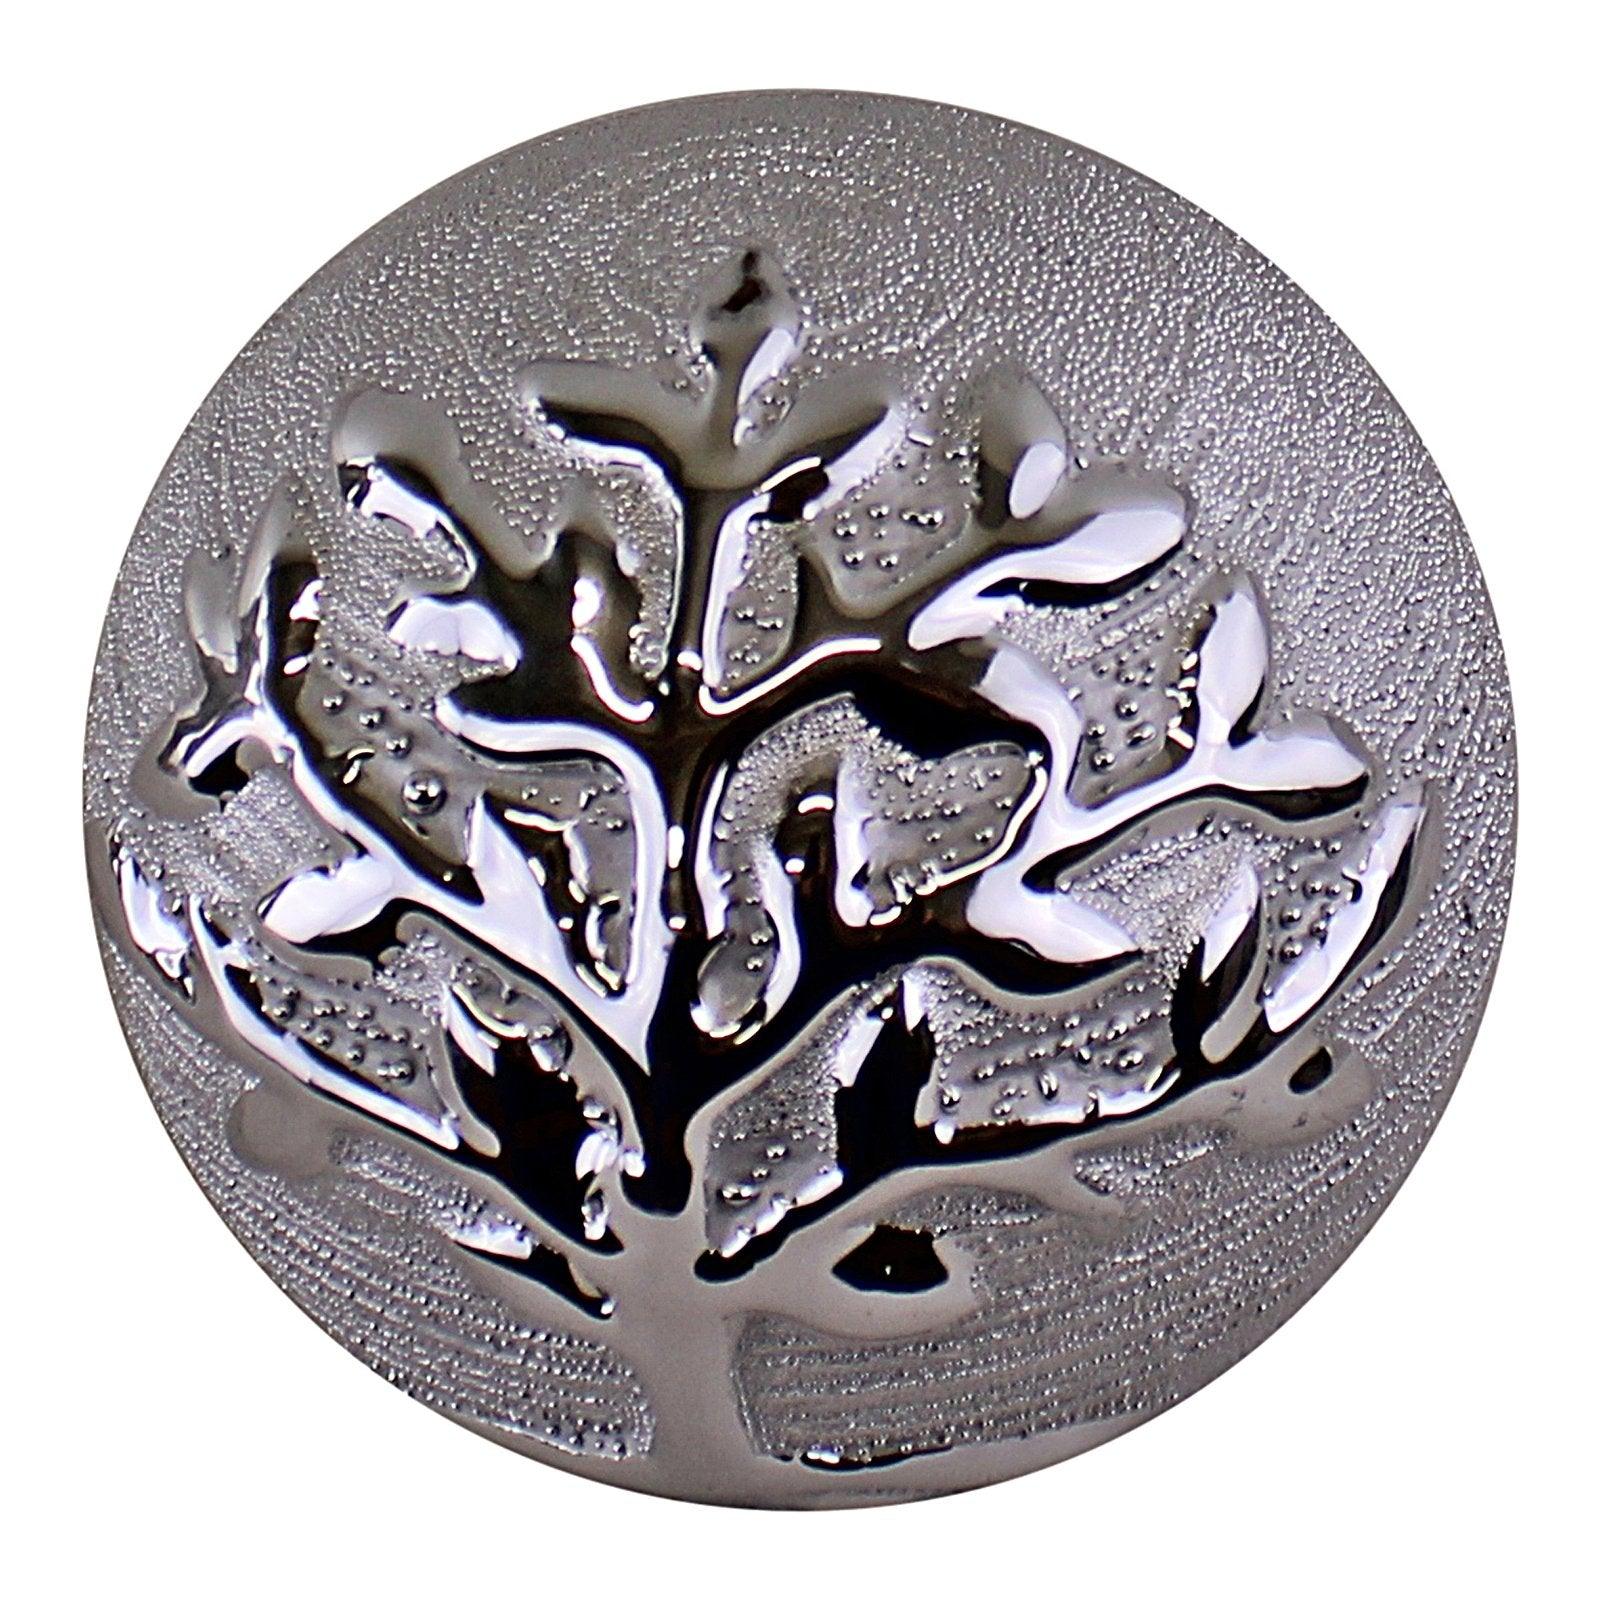 View Tree Of Life Spherical Ornament 10cm information